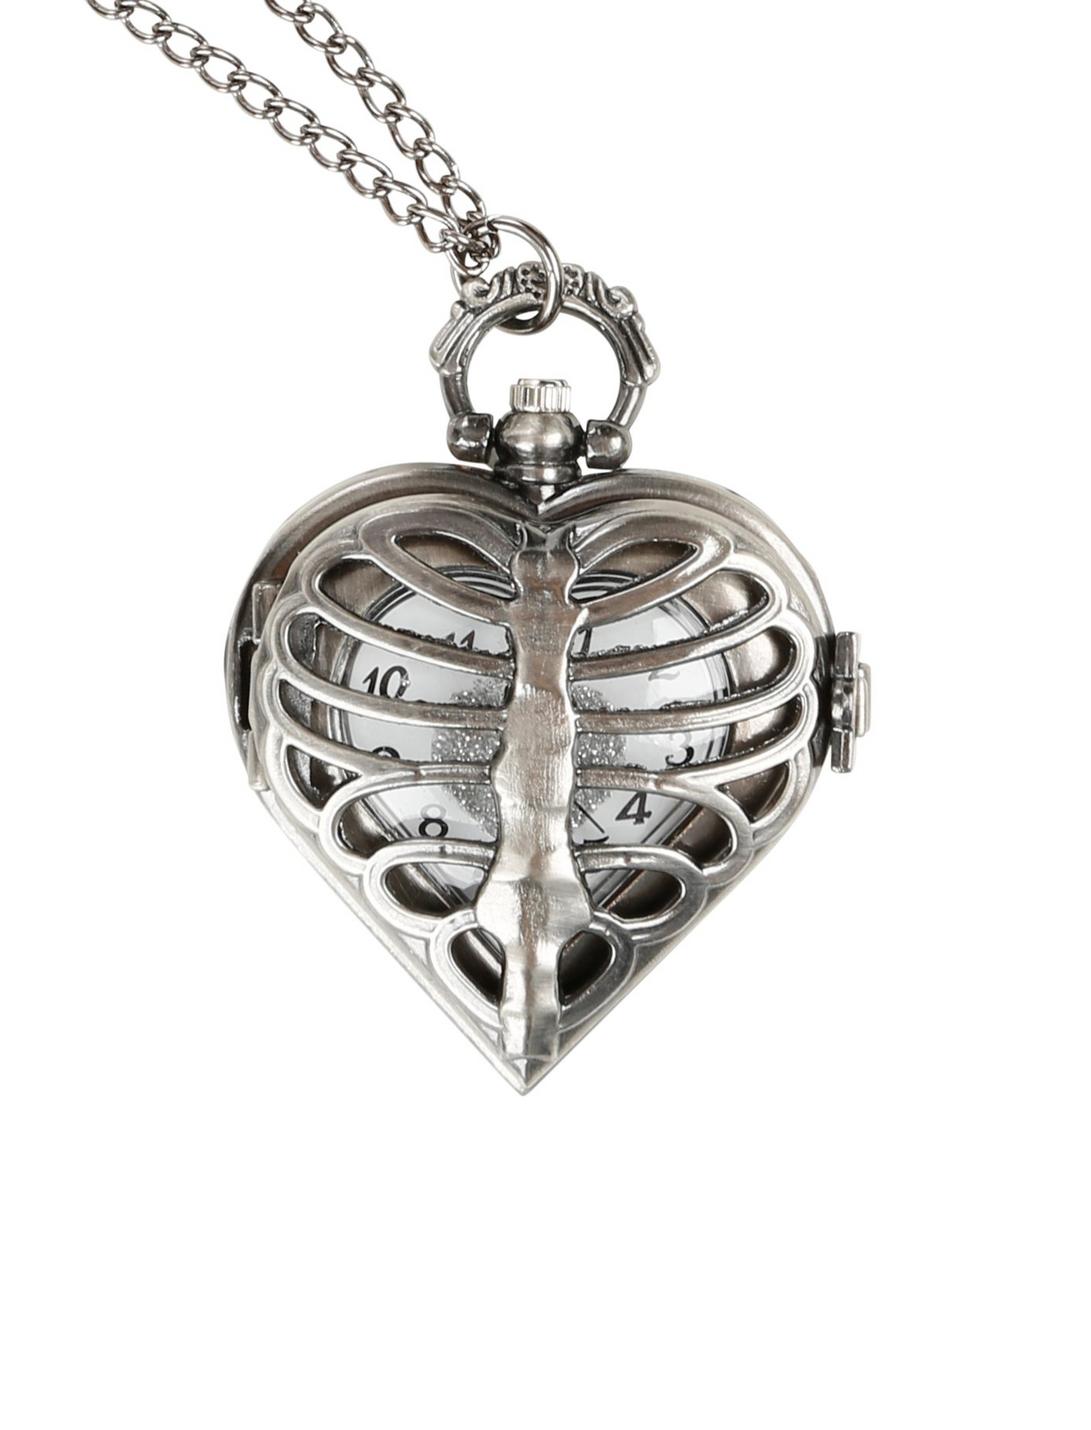 Burnished Silver Tone Heart Rib Cage Pocket Watch Necklace, , hi-res